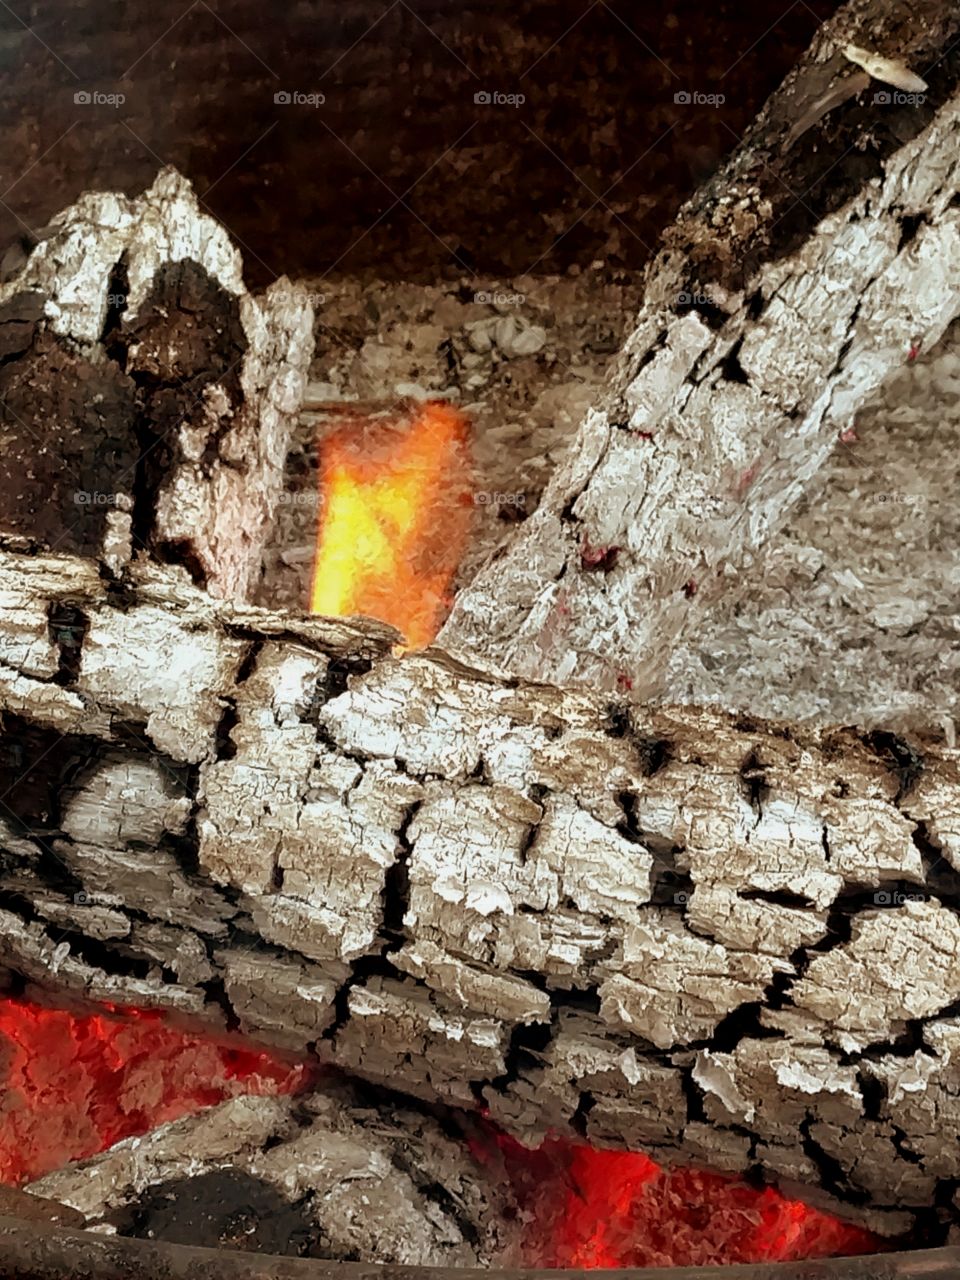 Dying Fire, with Logs and Ashes